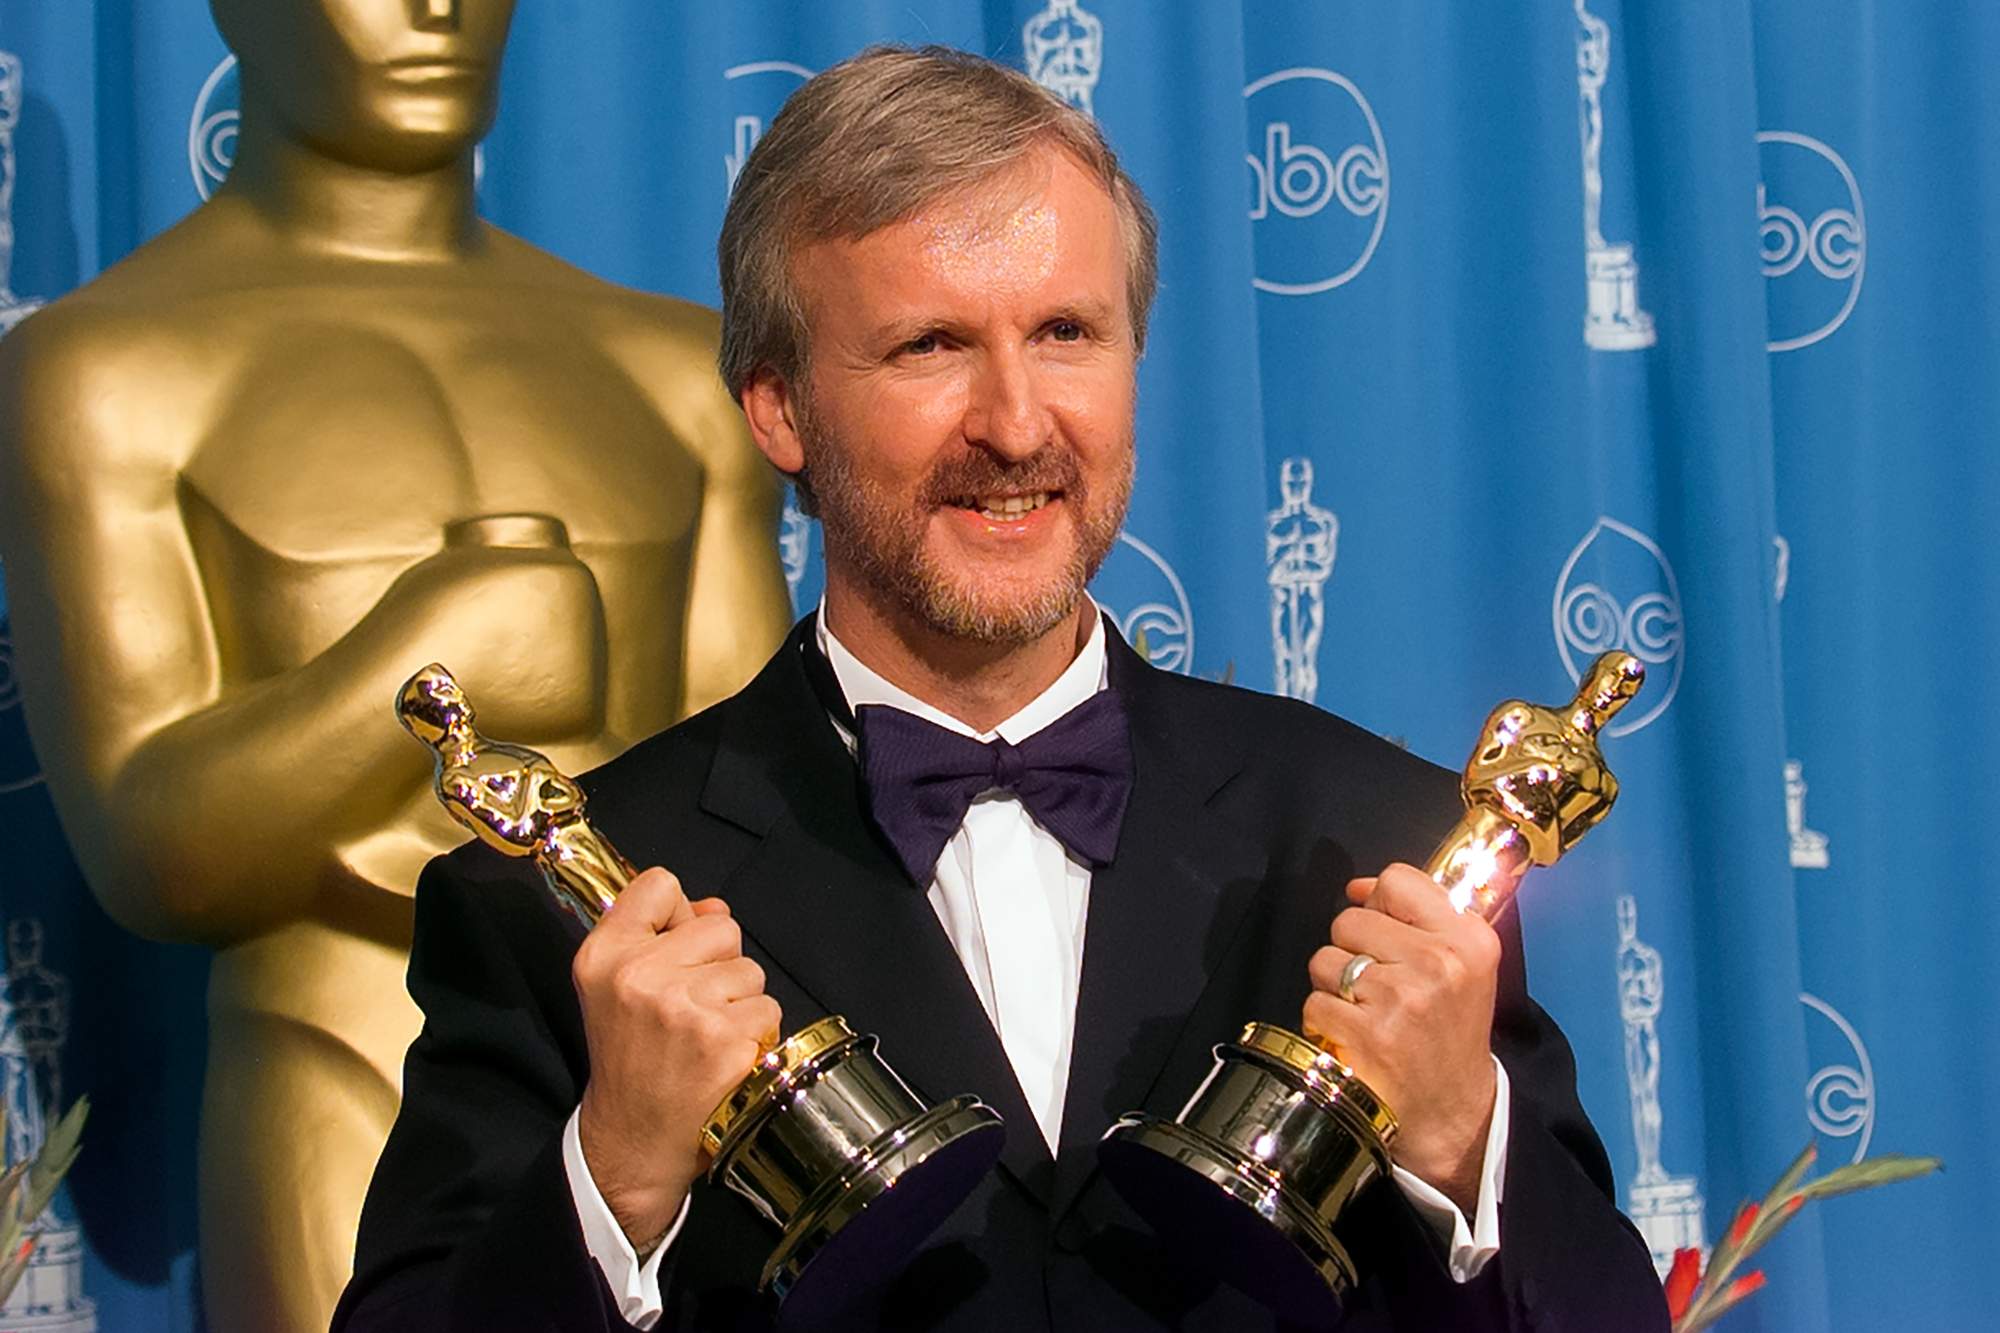 James Cameron, holding two Oscars, which he almost used to hit Harvey Weinstein. He's wearing a tux, standing in front of a blue background and a large version of the Oscar statuette.